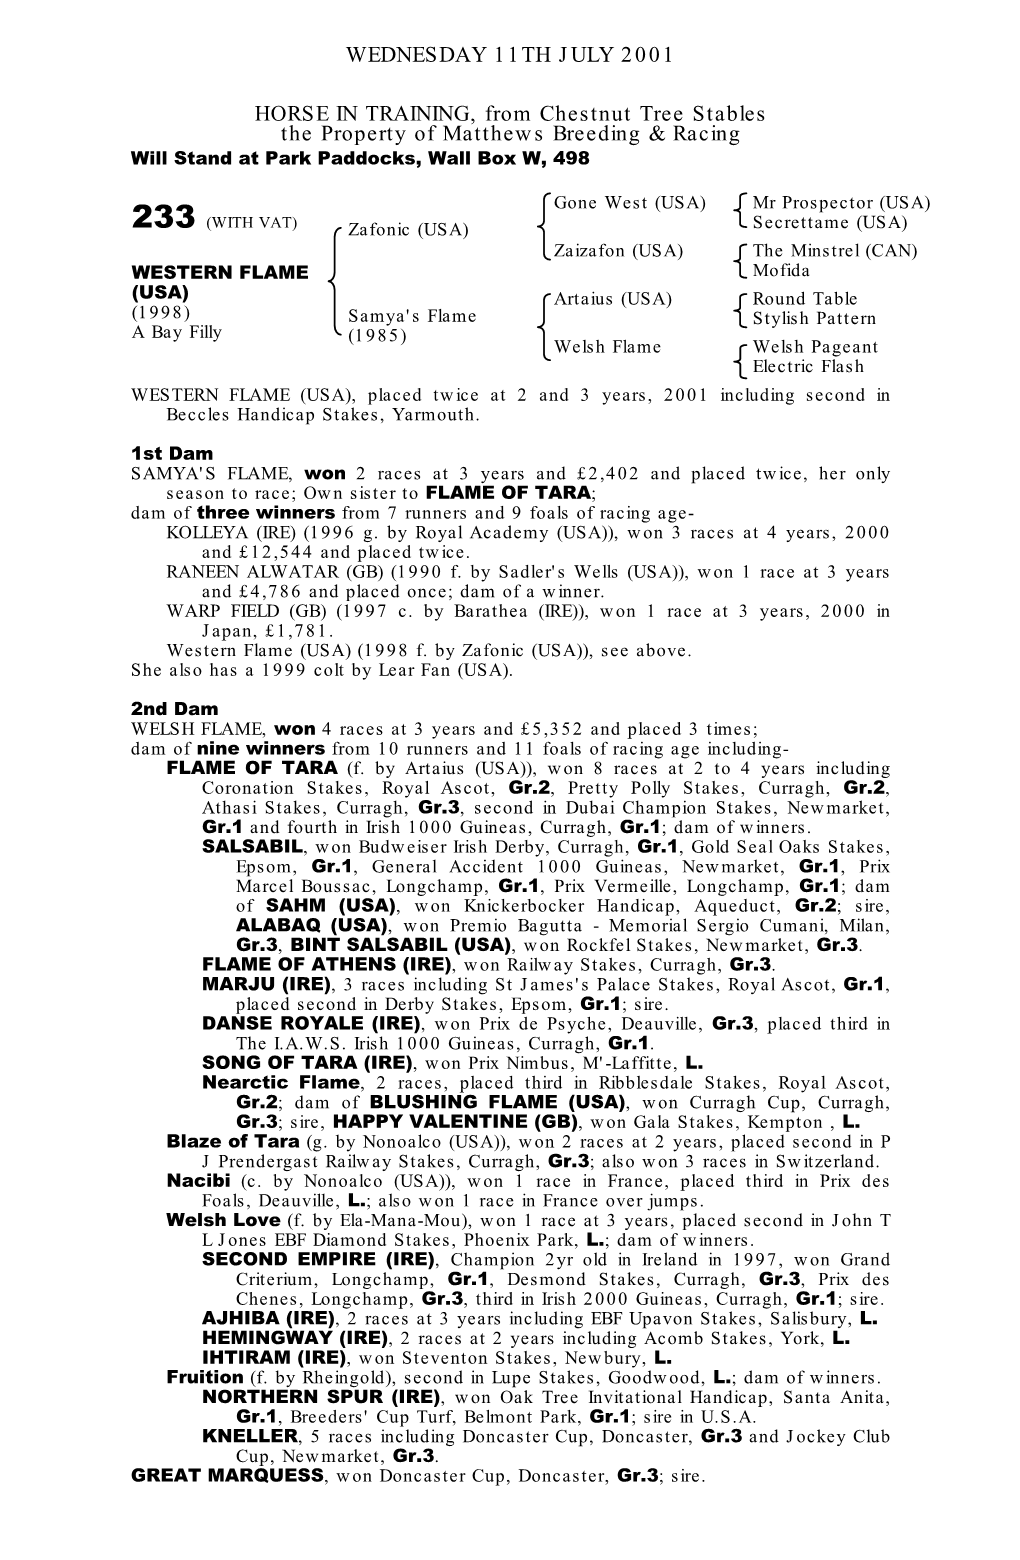 WEDNESDAY 11TH JULY 2001 HORSE in TRAINING, from Chestnut Tree Stables the Property of Matthews Breeding & Racing